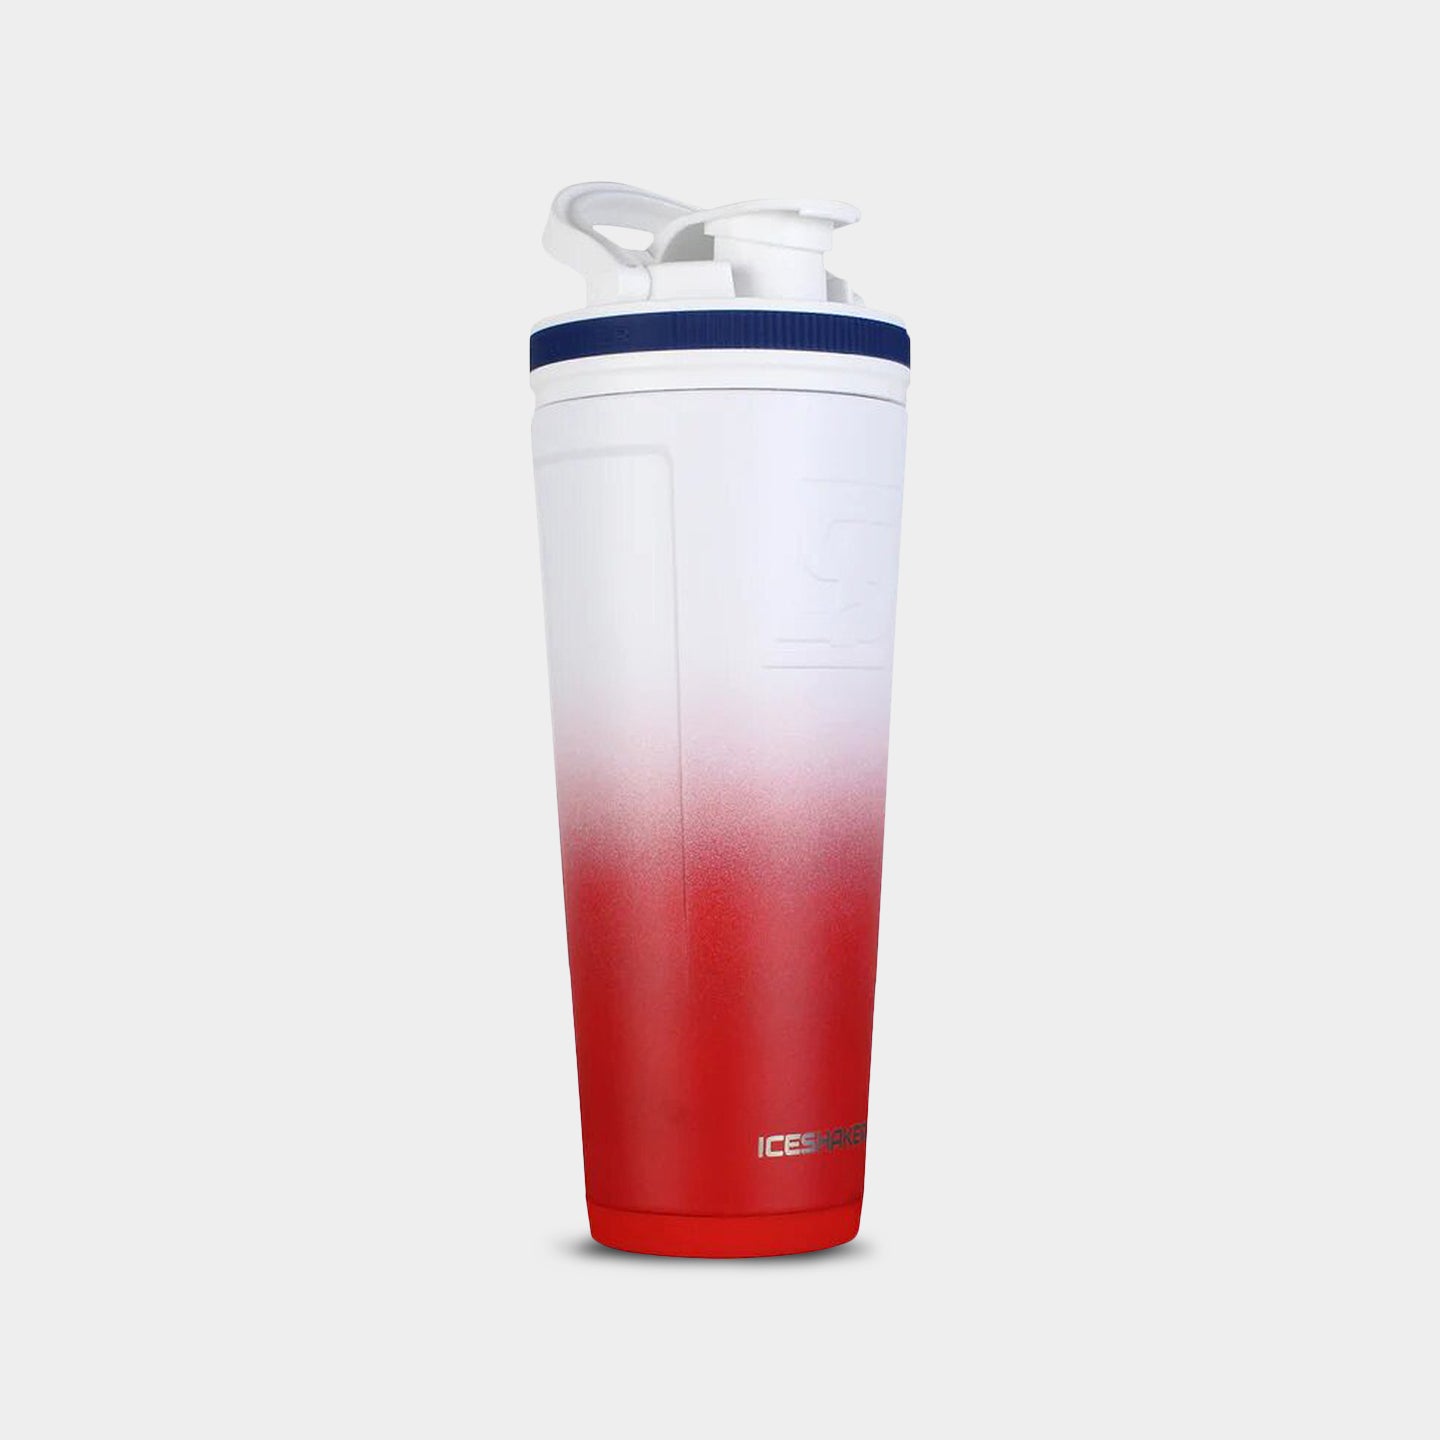 Ice Shaker 36oz. Protein Shaker Bottle USA A1